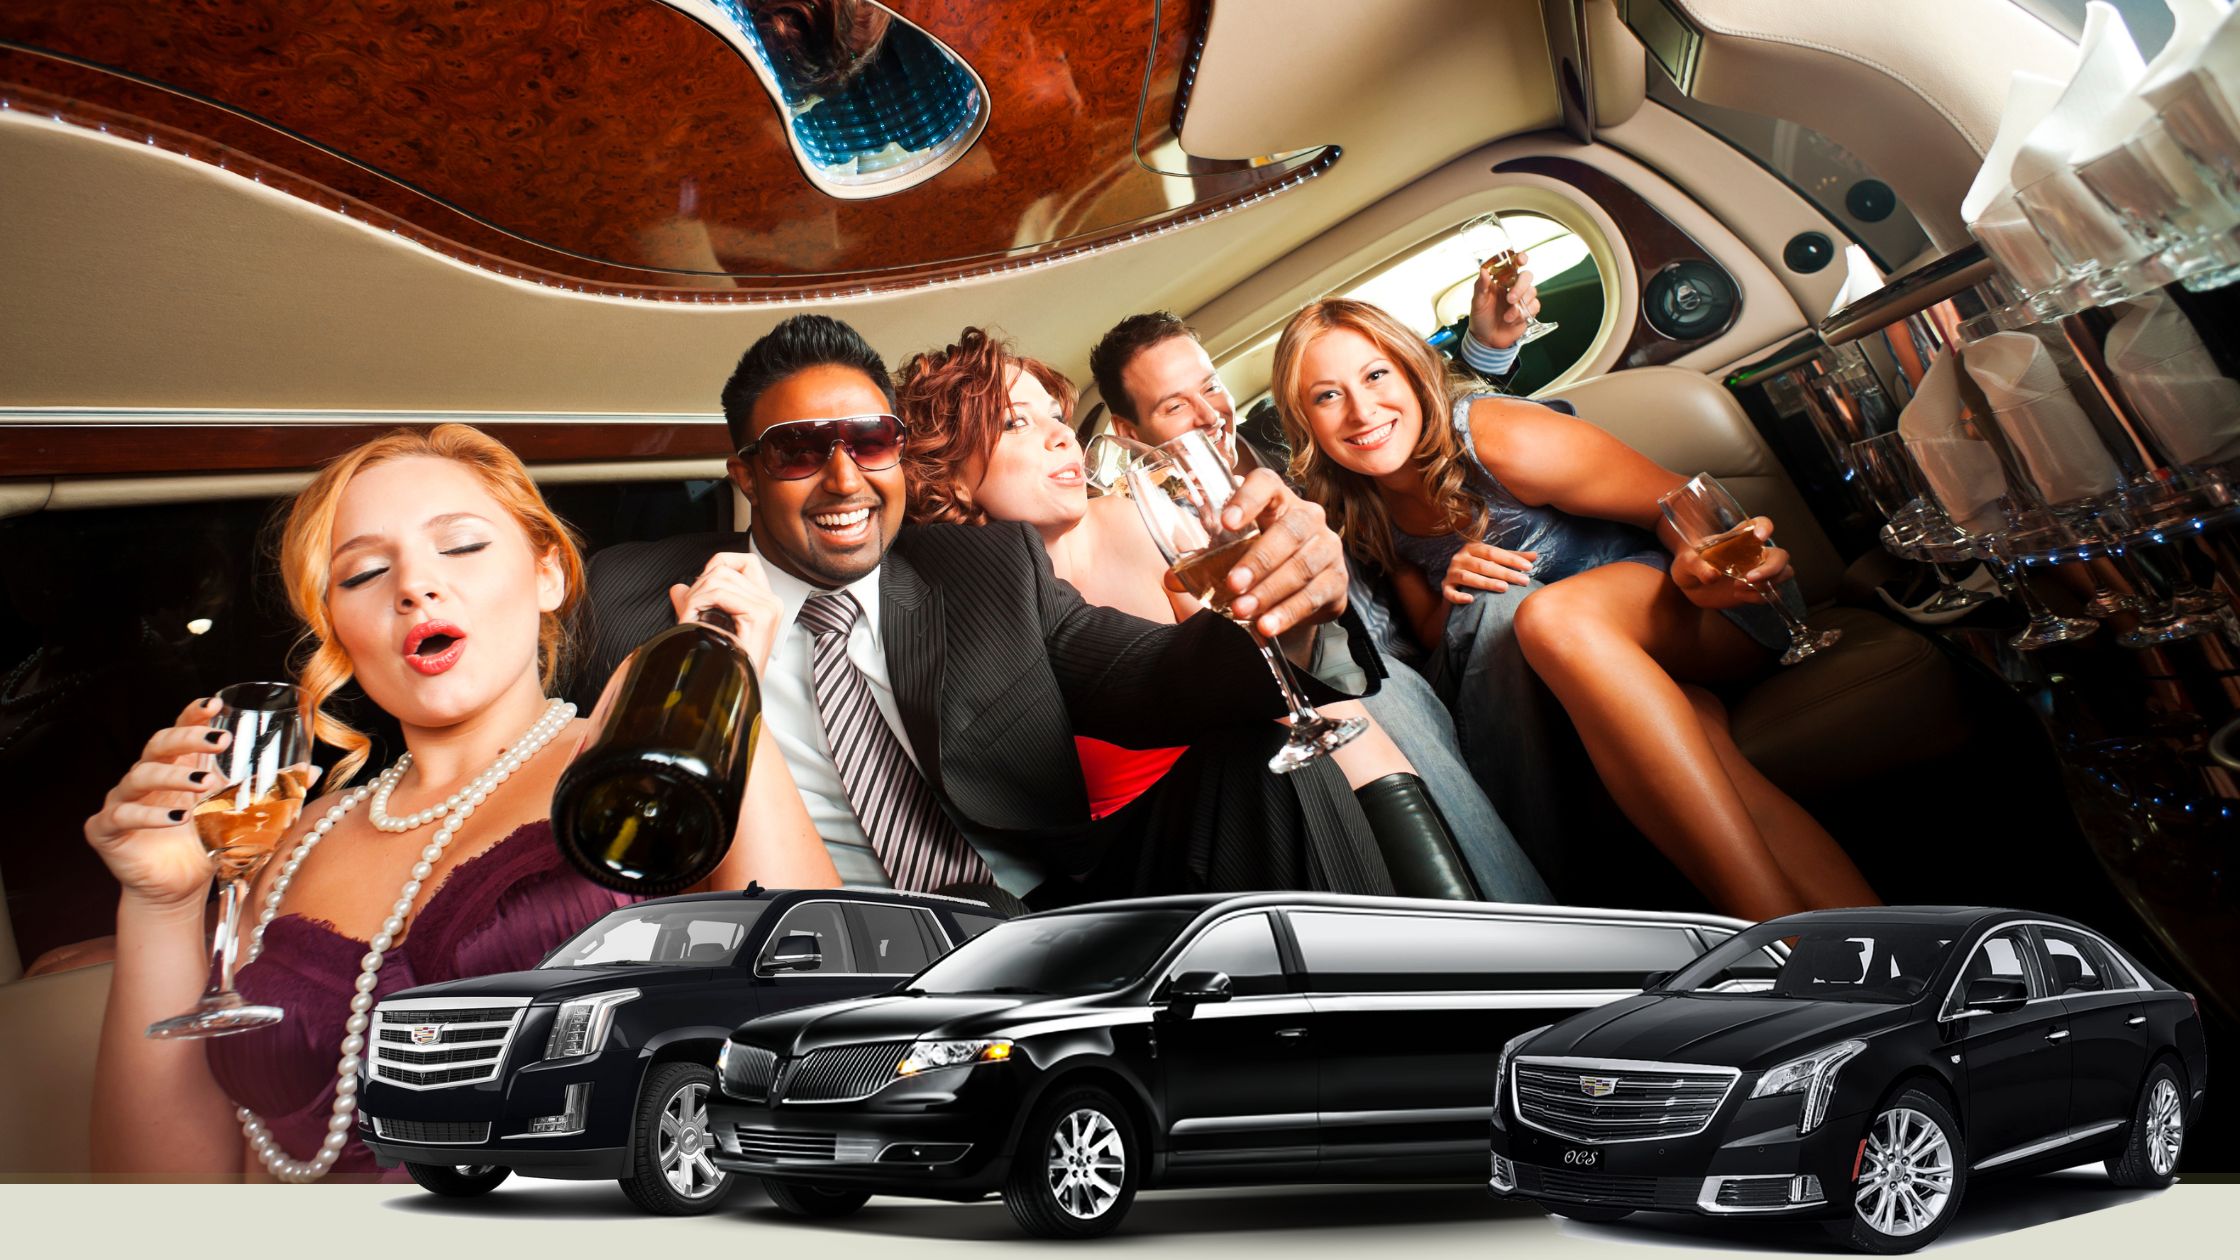 Belmont Stakes Car Limo Service